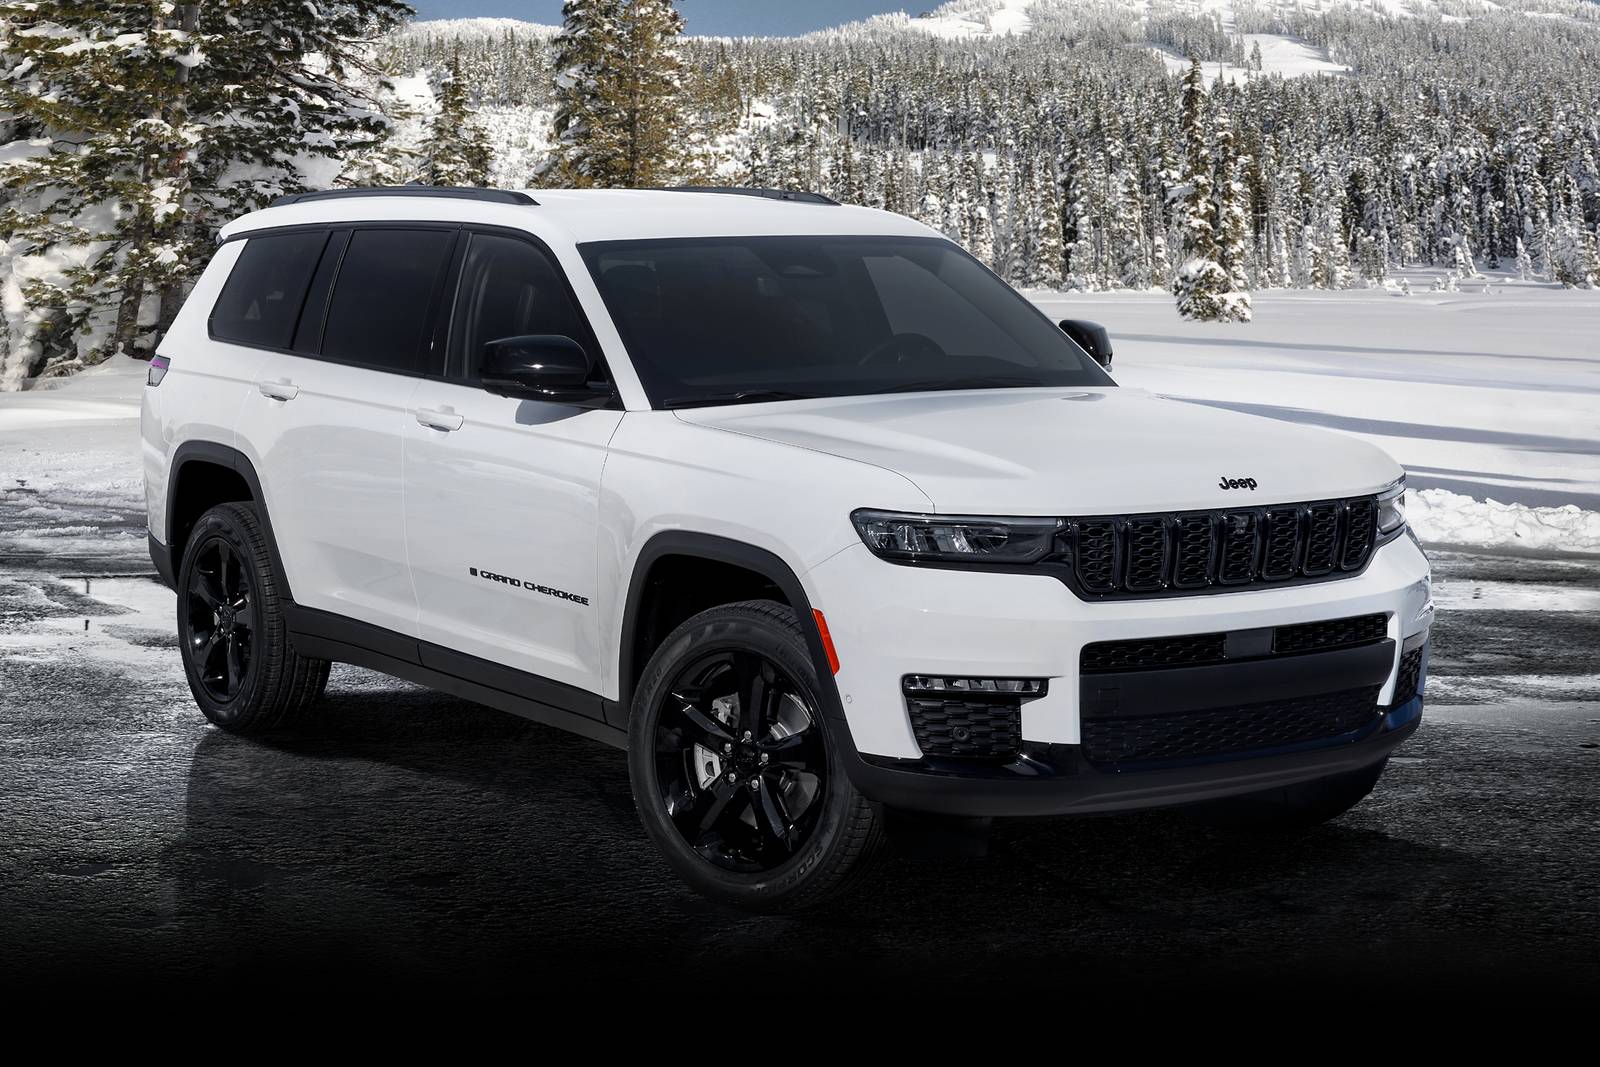 How Many Gallons Does a Jeep Grand Cherokee Hold  : Discover the Fuel Capacity of this Iconic SUV